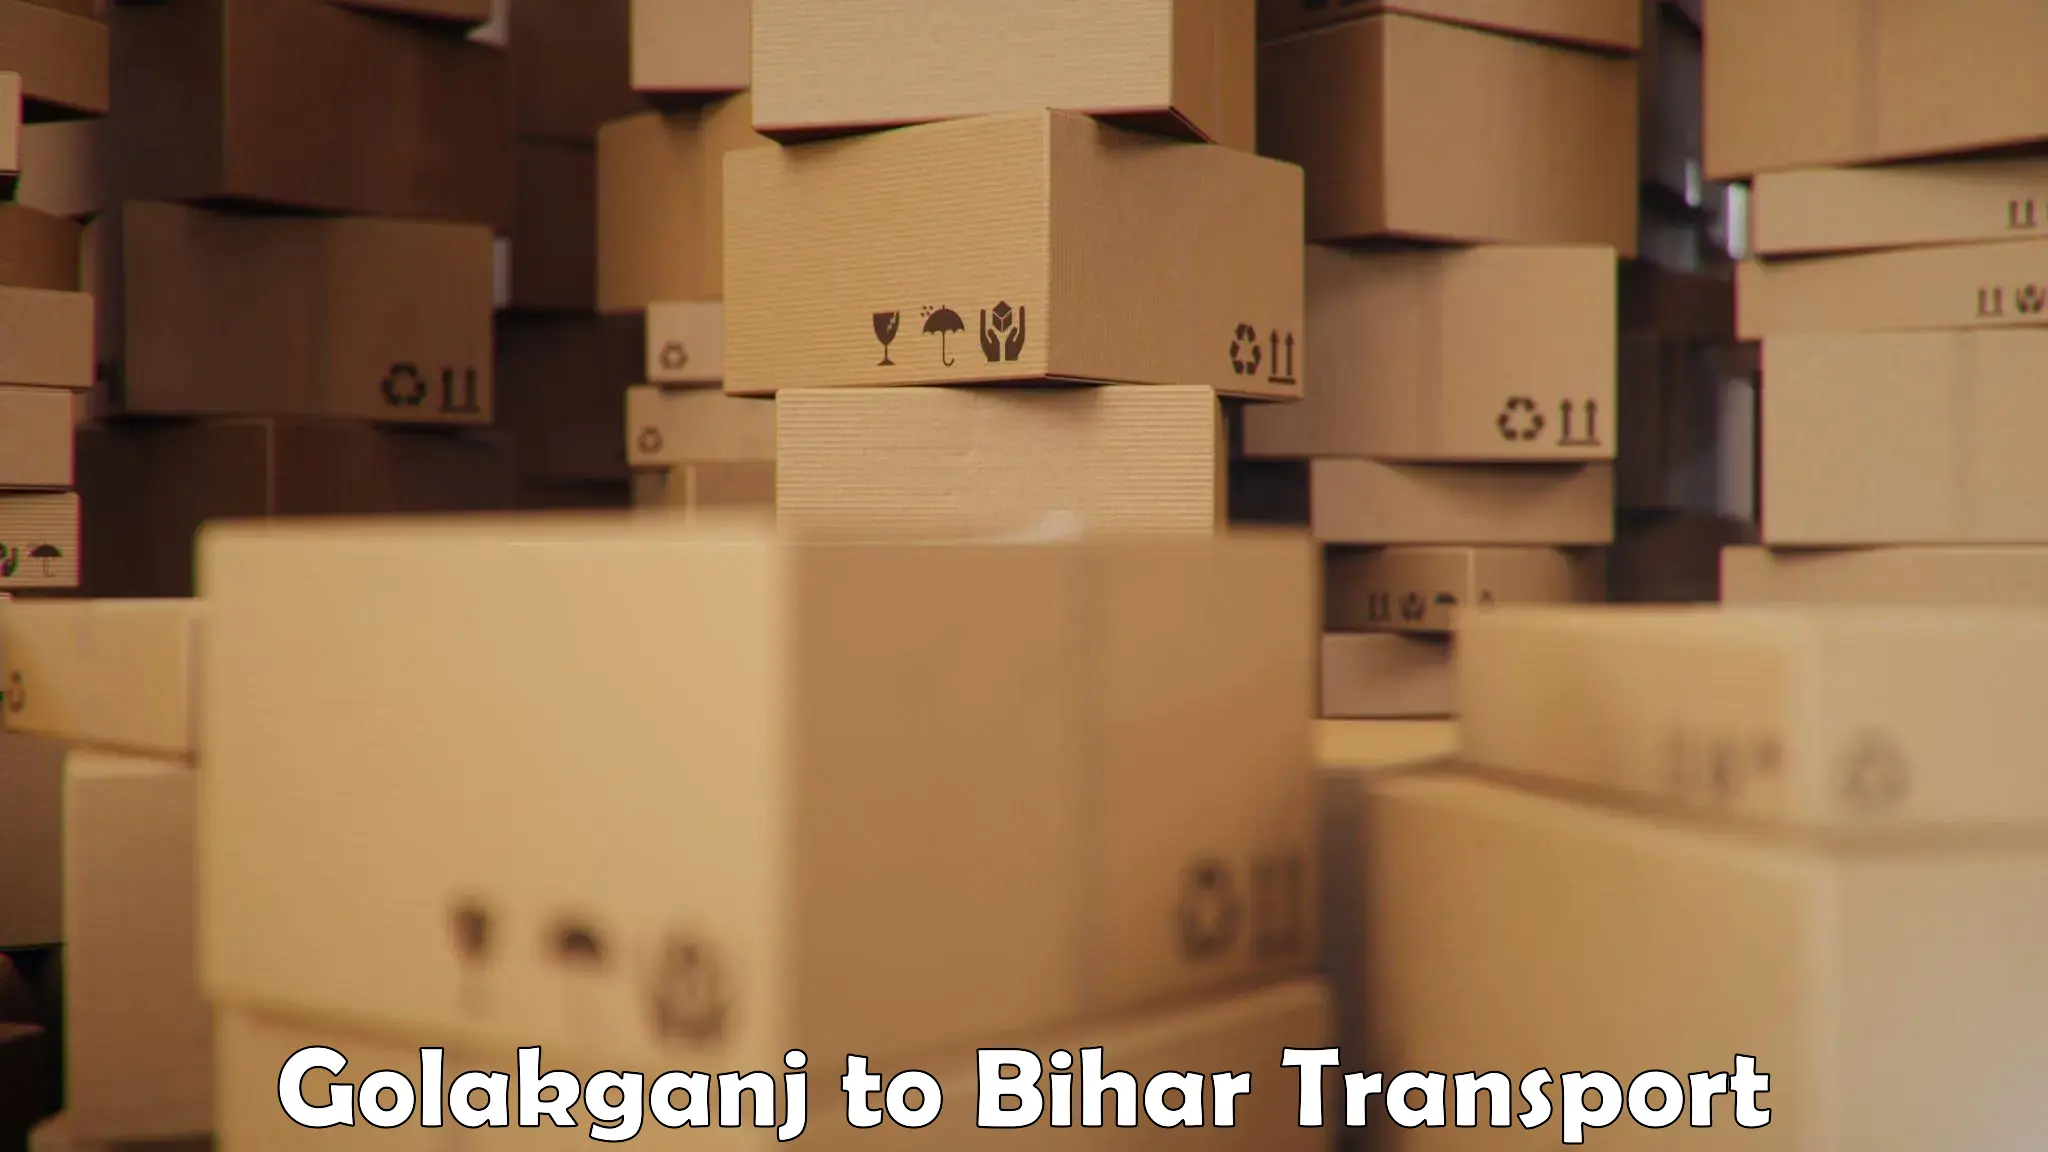 Air freight transport services Golakganj to Bhojpur